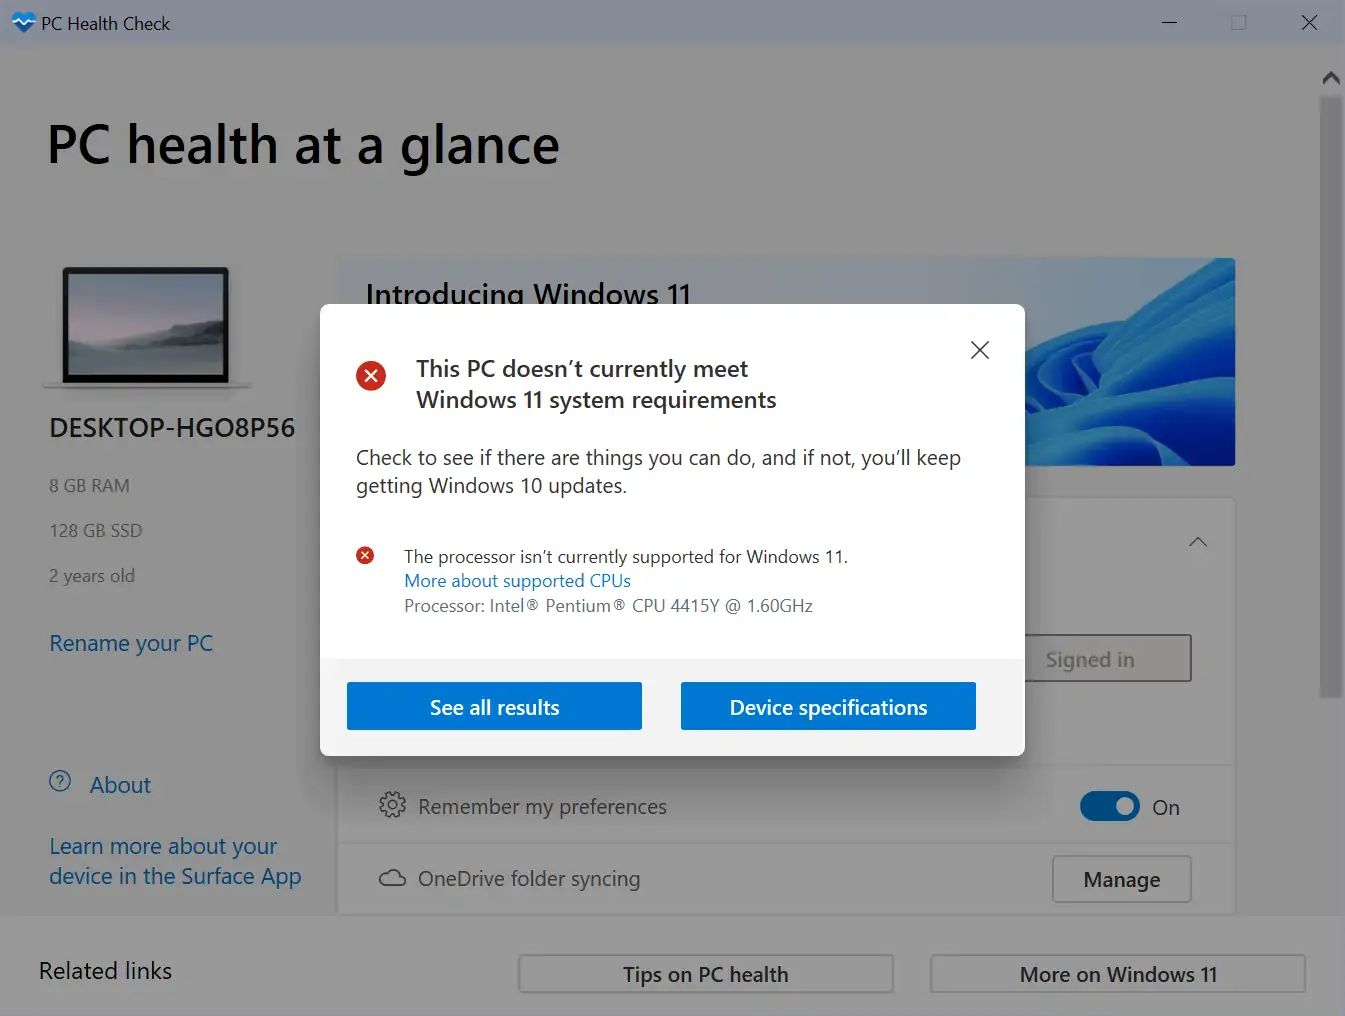 pc-health-check-windows-11-requirements.